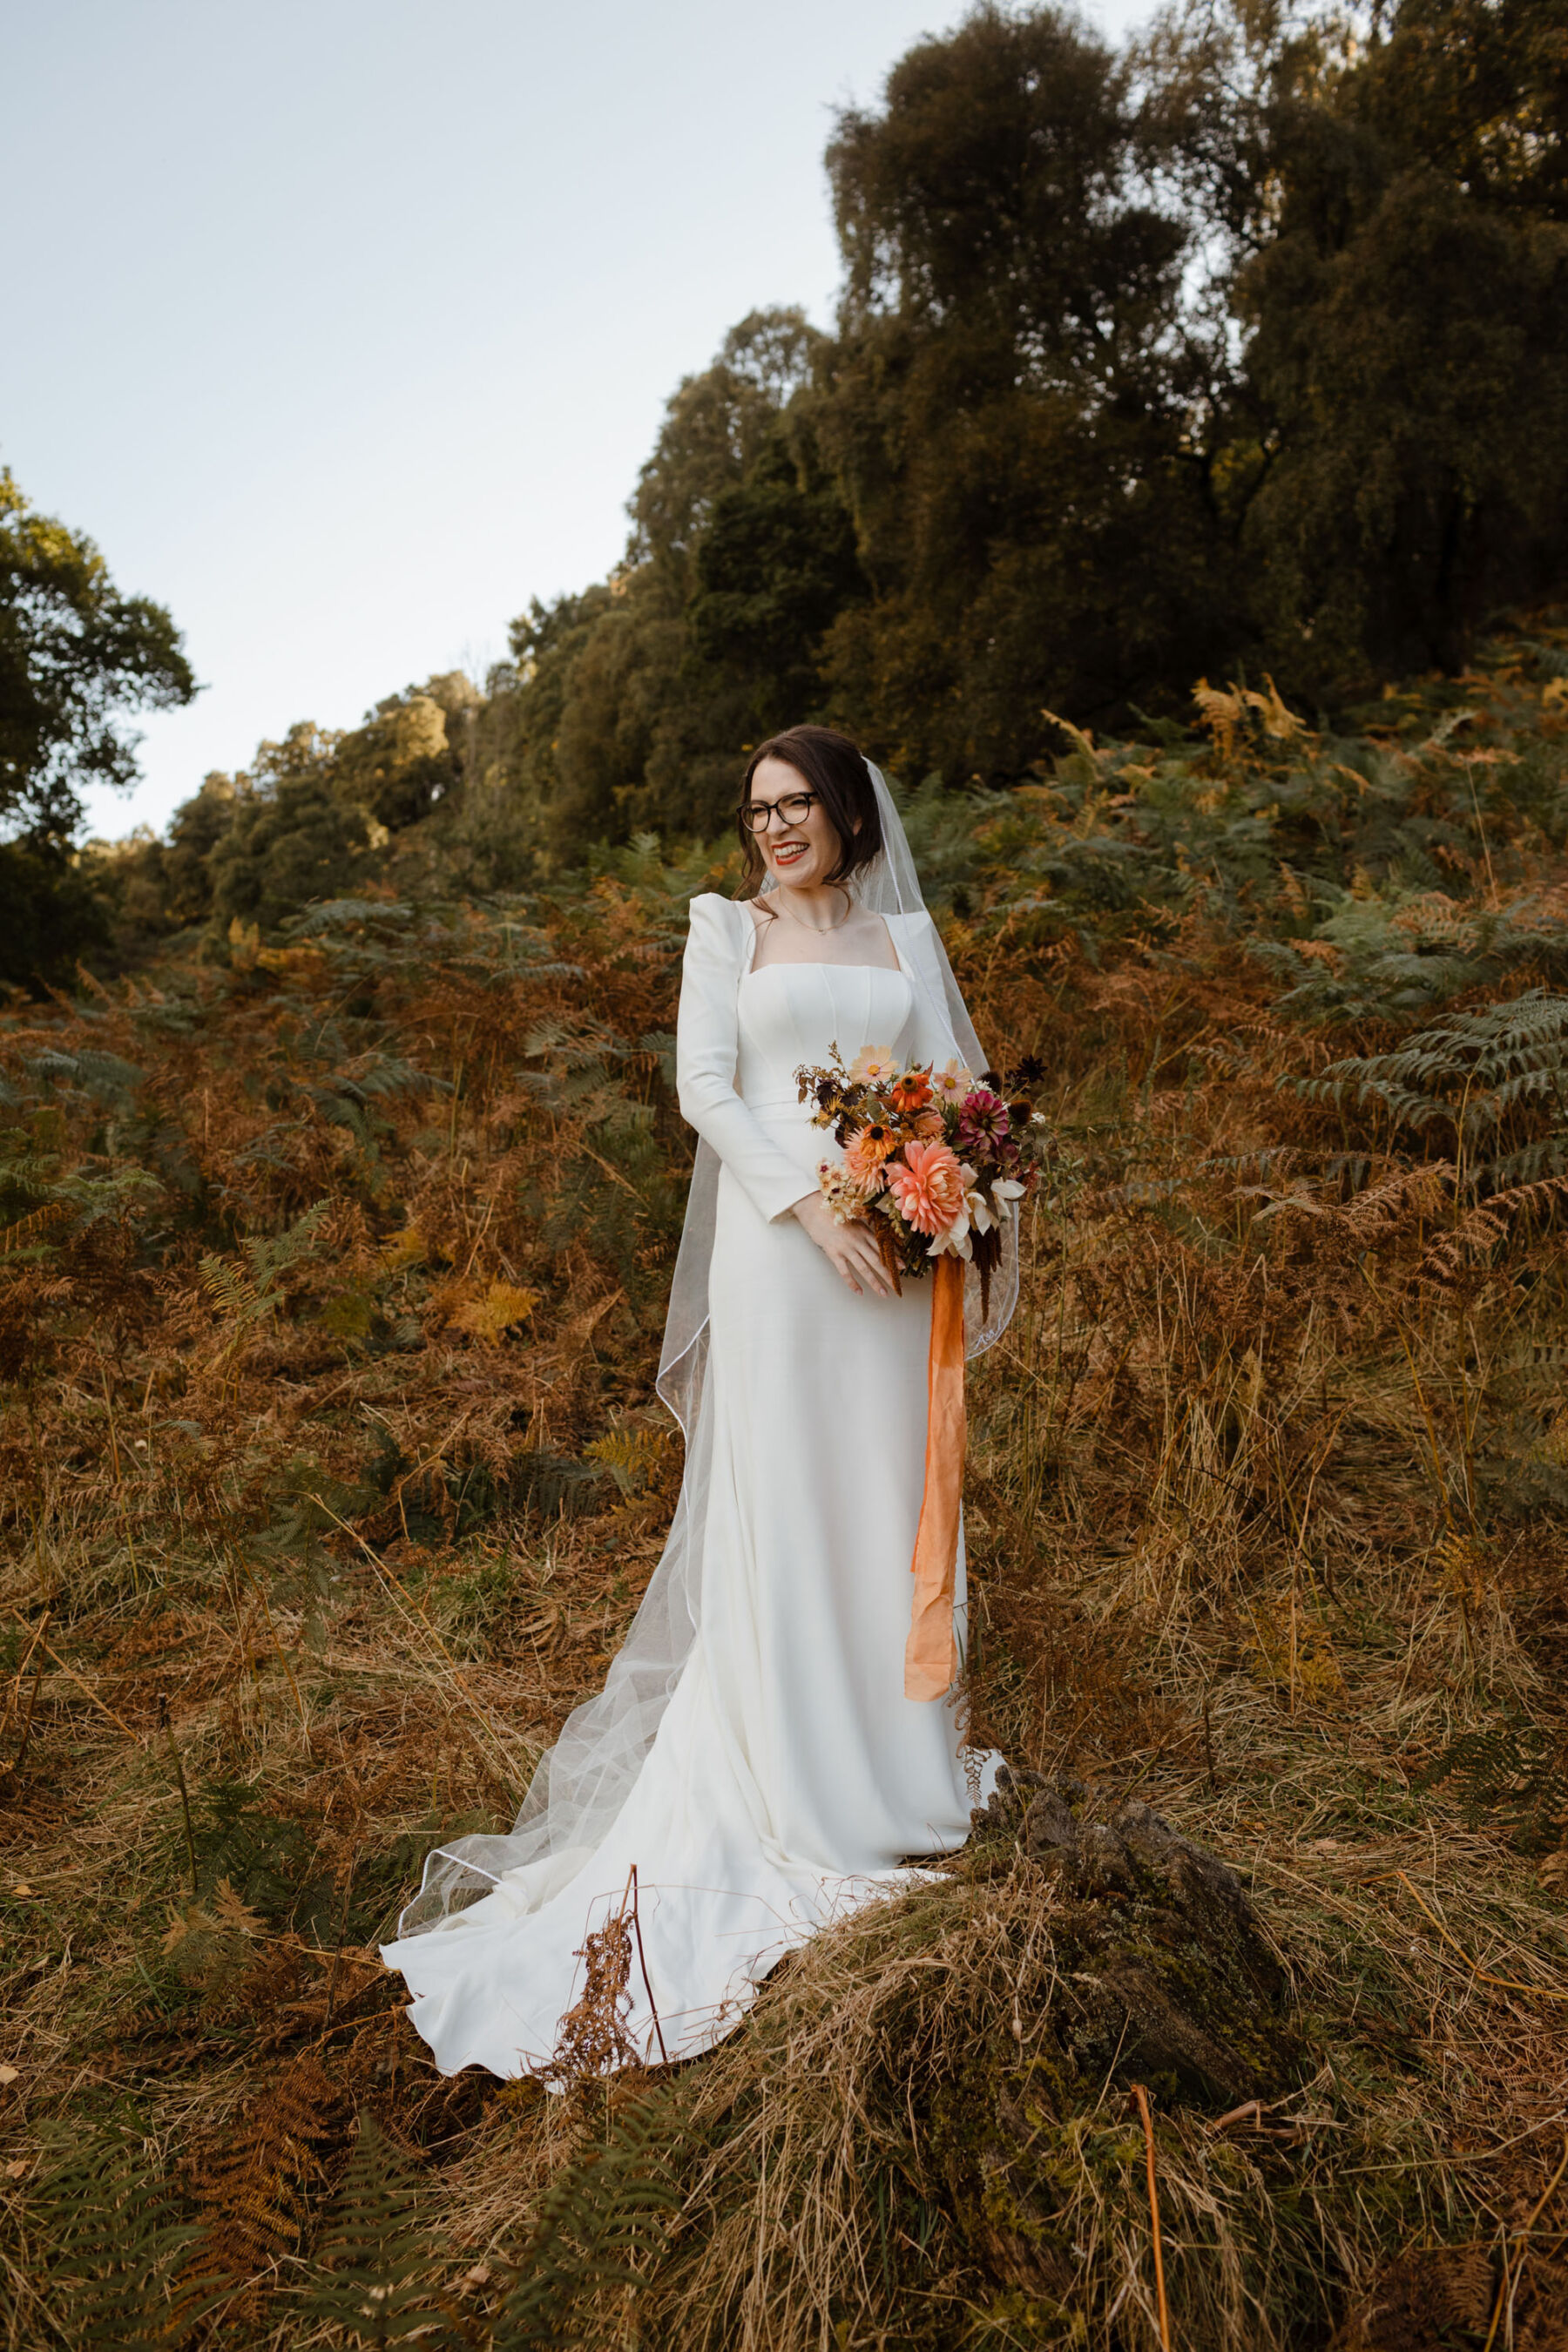 Bride in Amber by Suzanne Neville carrying a Colourful Autumn Dahlia wedding bouquet